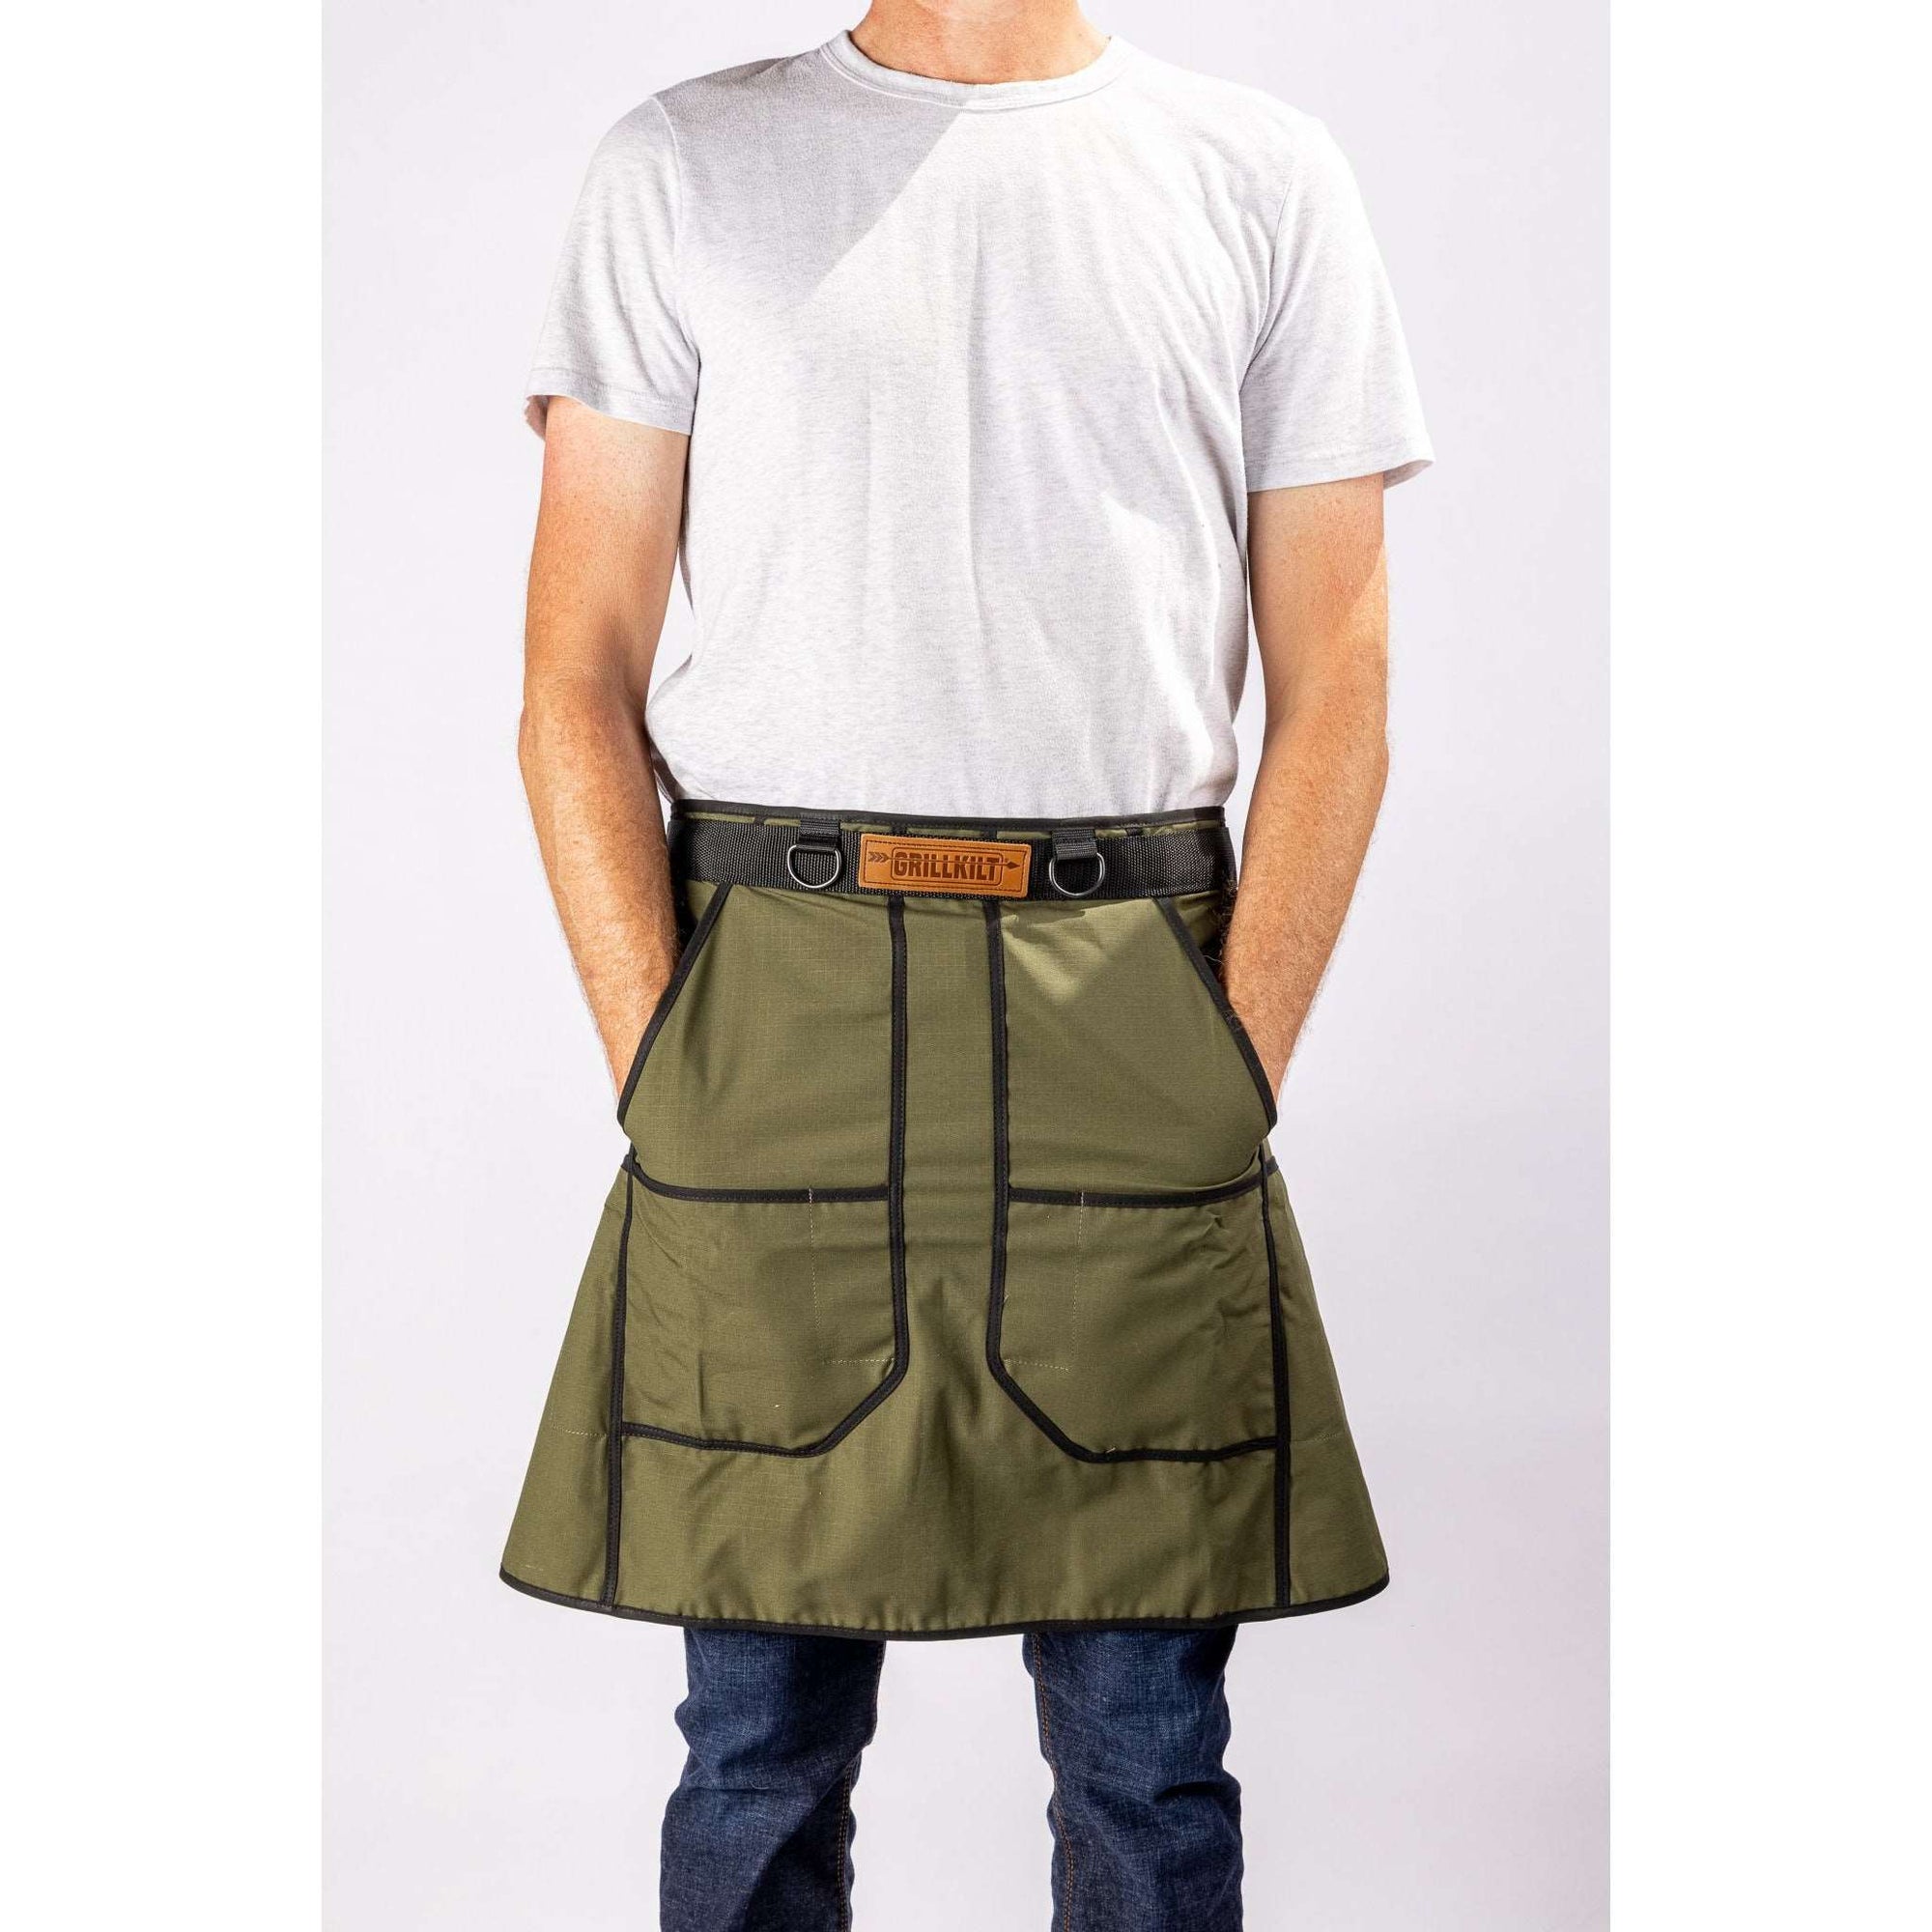 GRILLKILT GRILL APRON IN OLIVE GREEN COLOR. GRILL KILT GRILLING APRON #GRILL #KILT #APRON #GRILLING #CHEF #BBQ